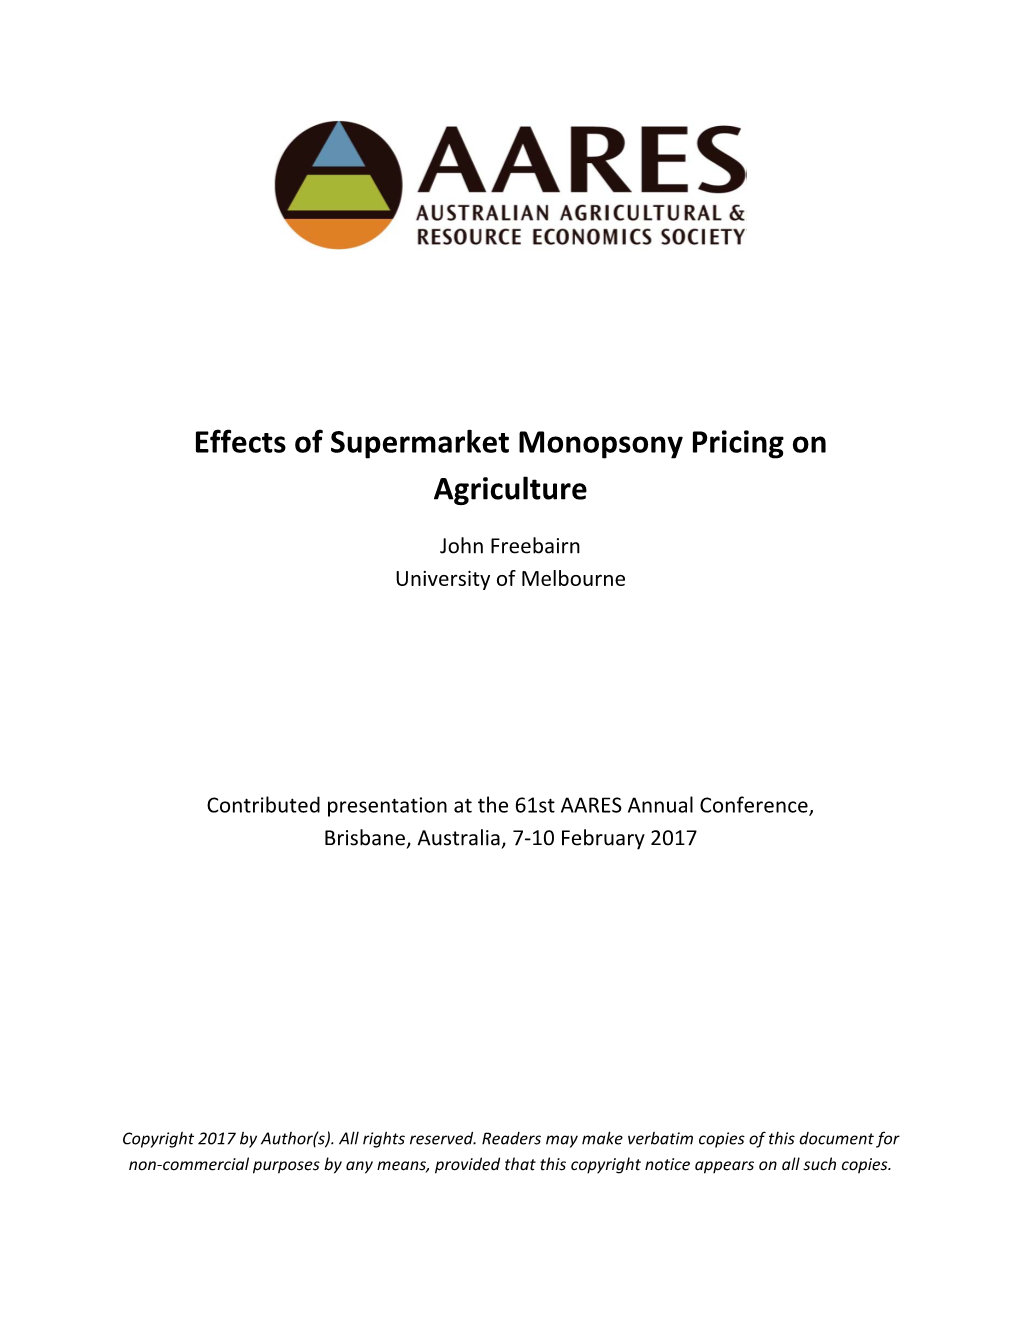 Effects of Supermarket Monopsony Pricing on Agriculture